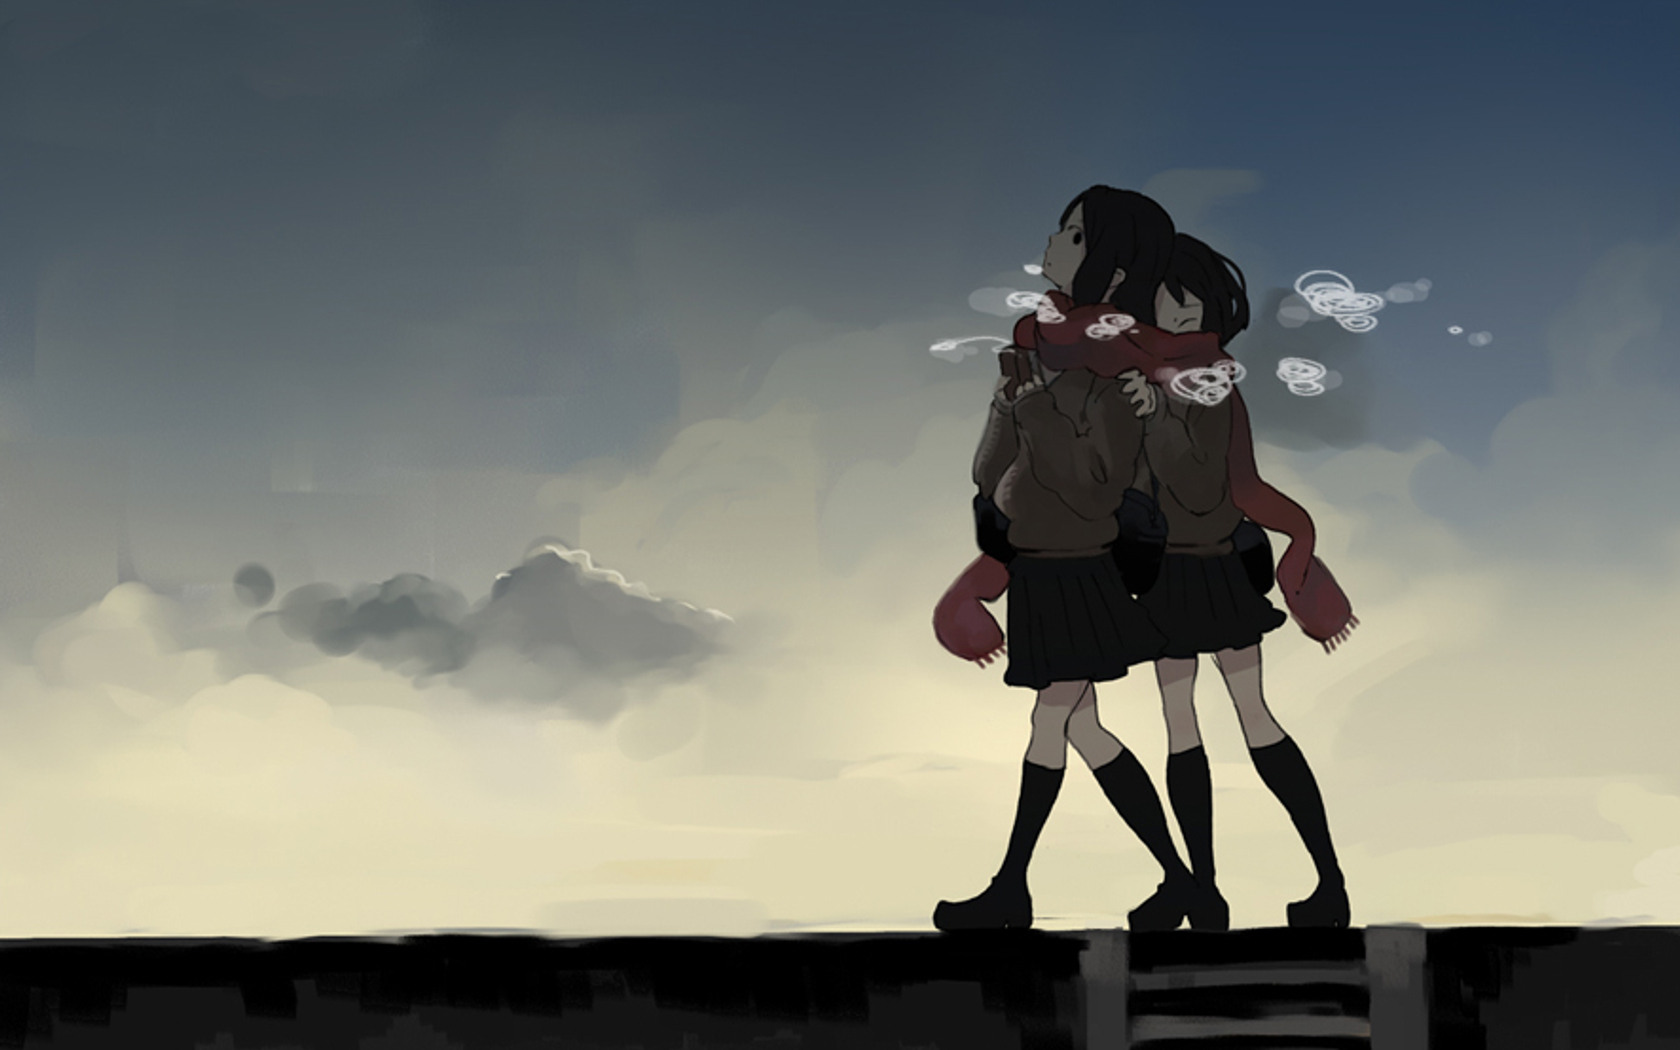 Anime-themed desktop wallpaper featuring original characters in a yuri pairing.